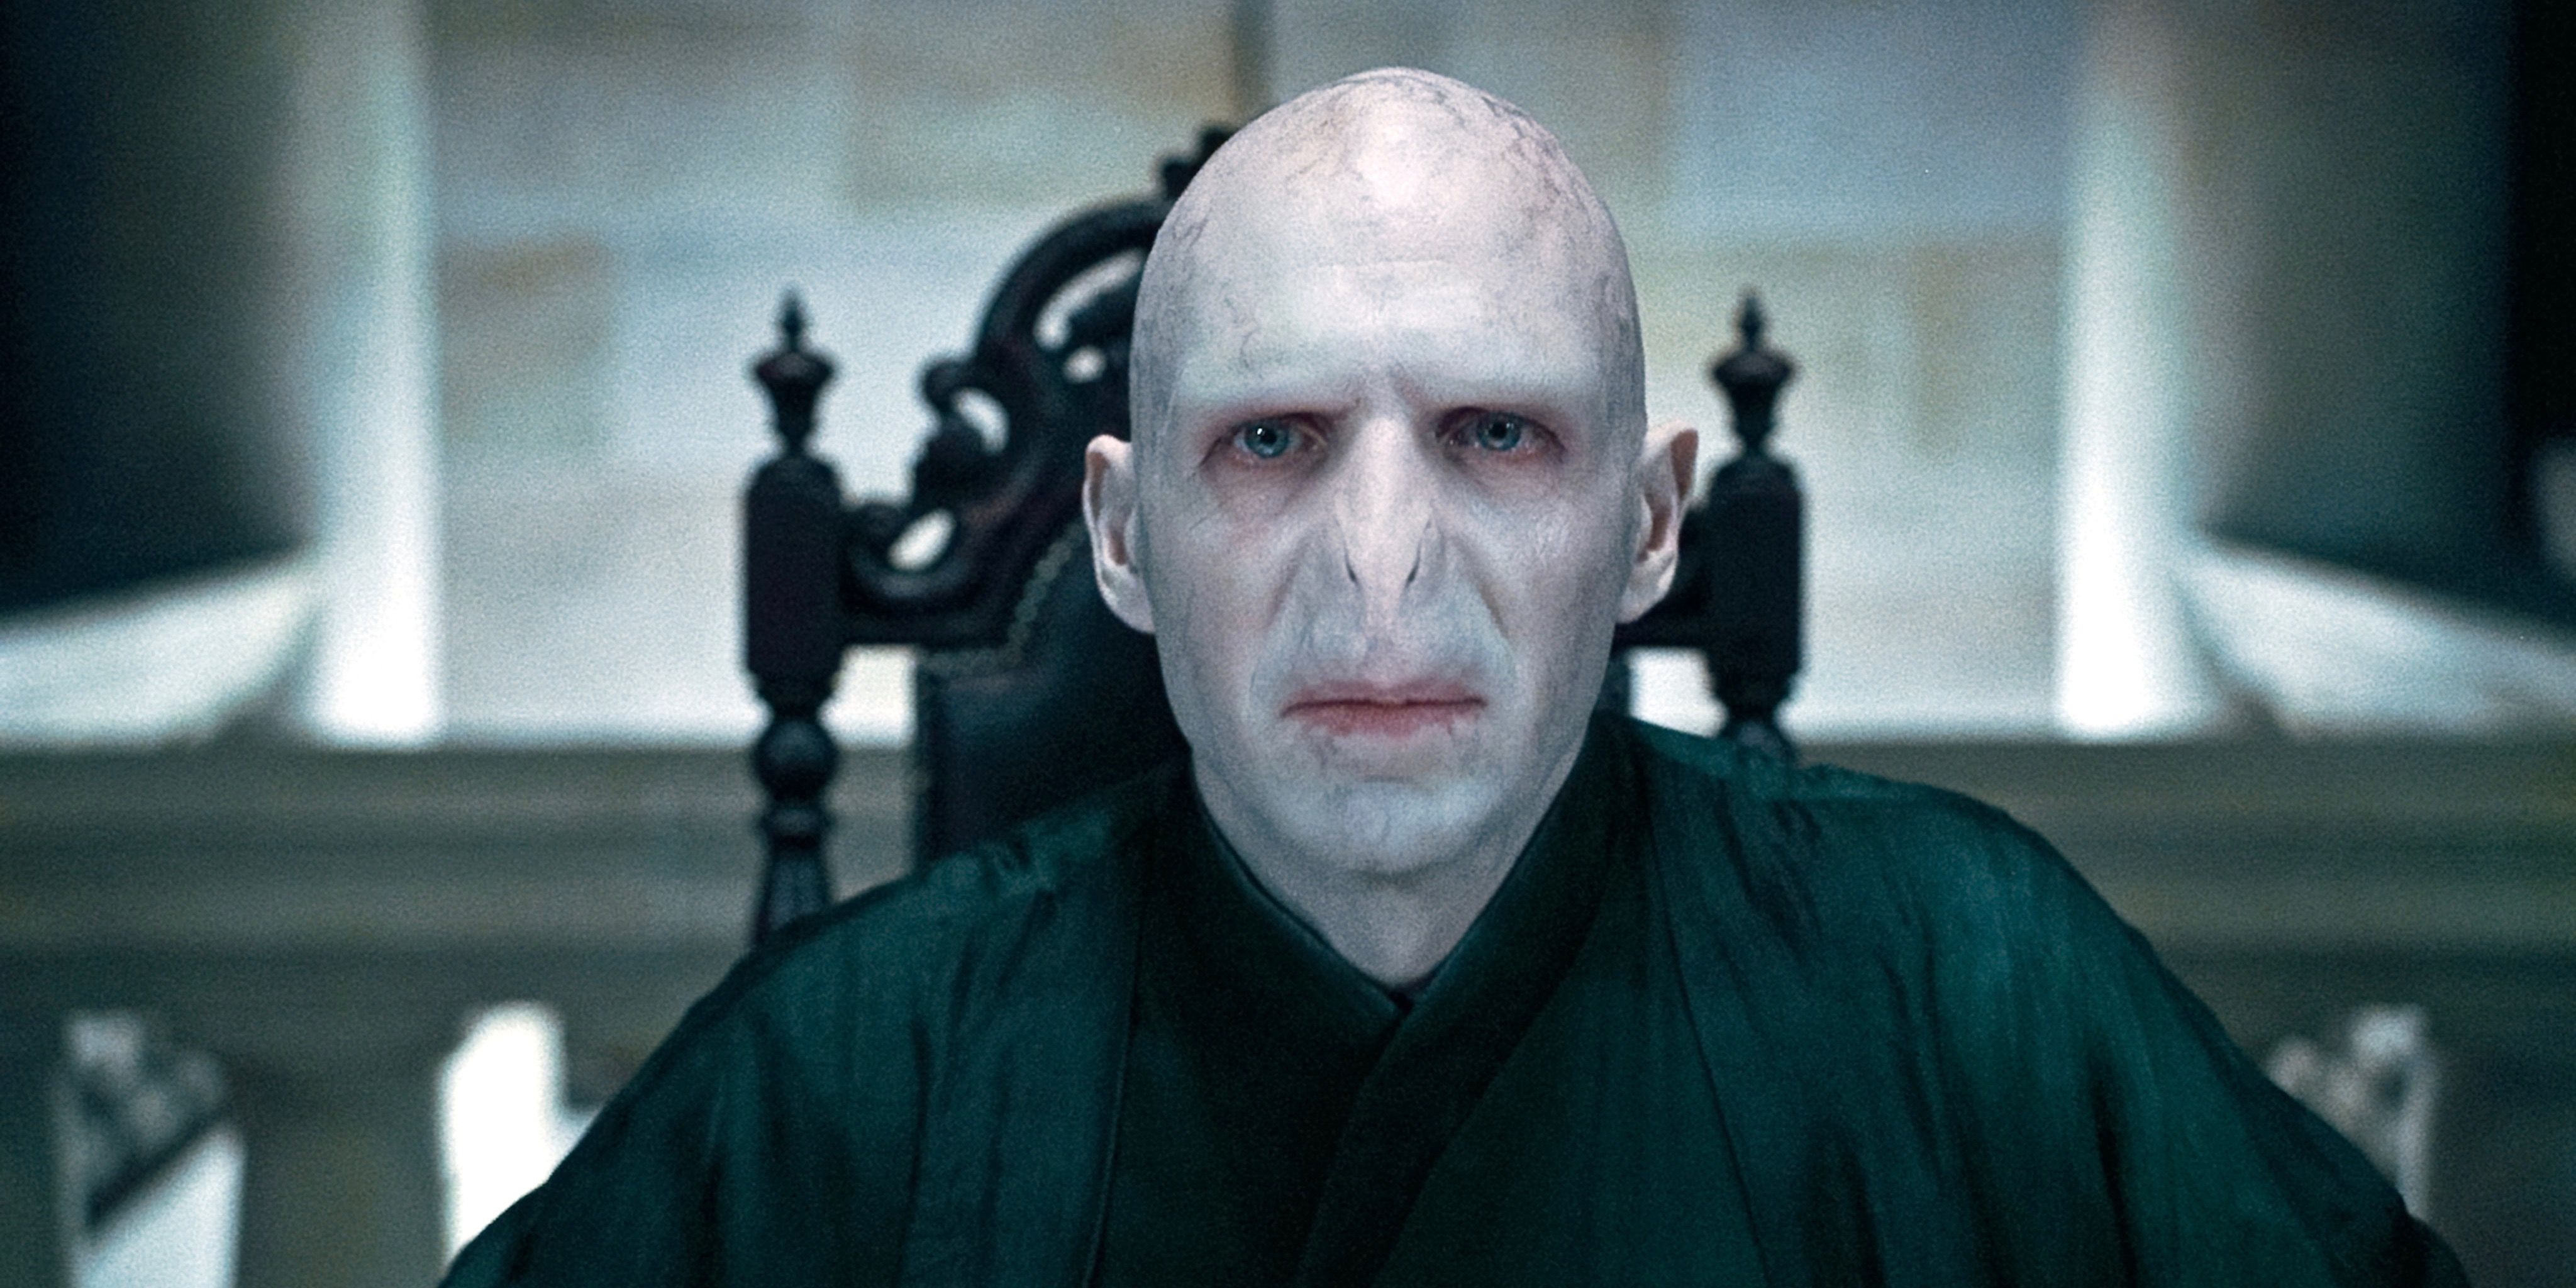 Voldemort sitting at the head of a table in Deathly Hallows Part 1.